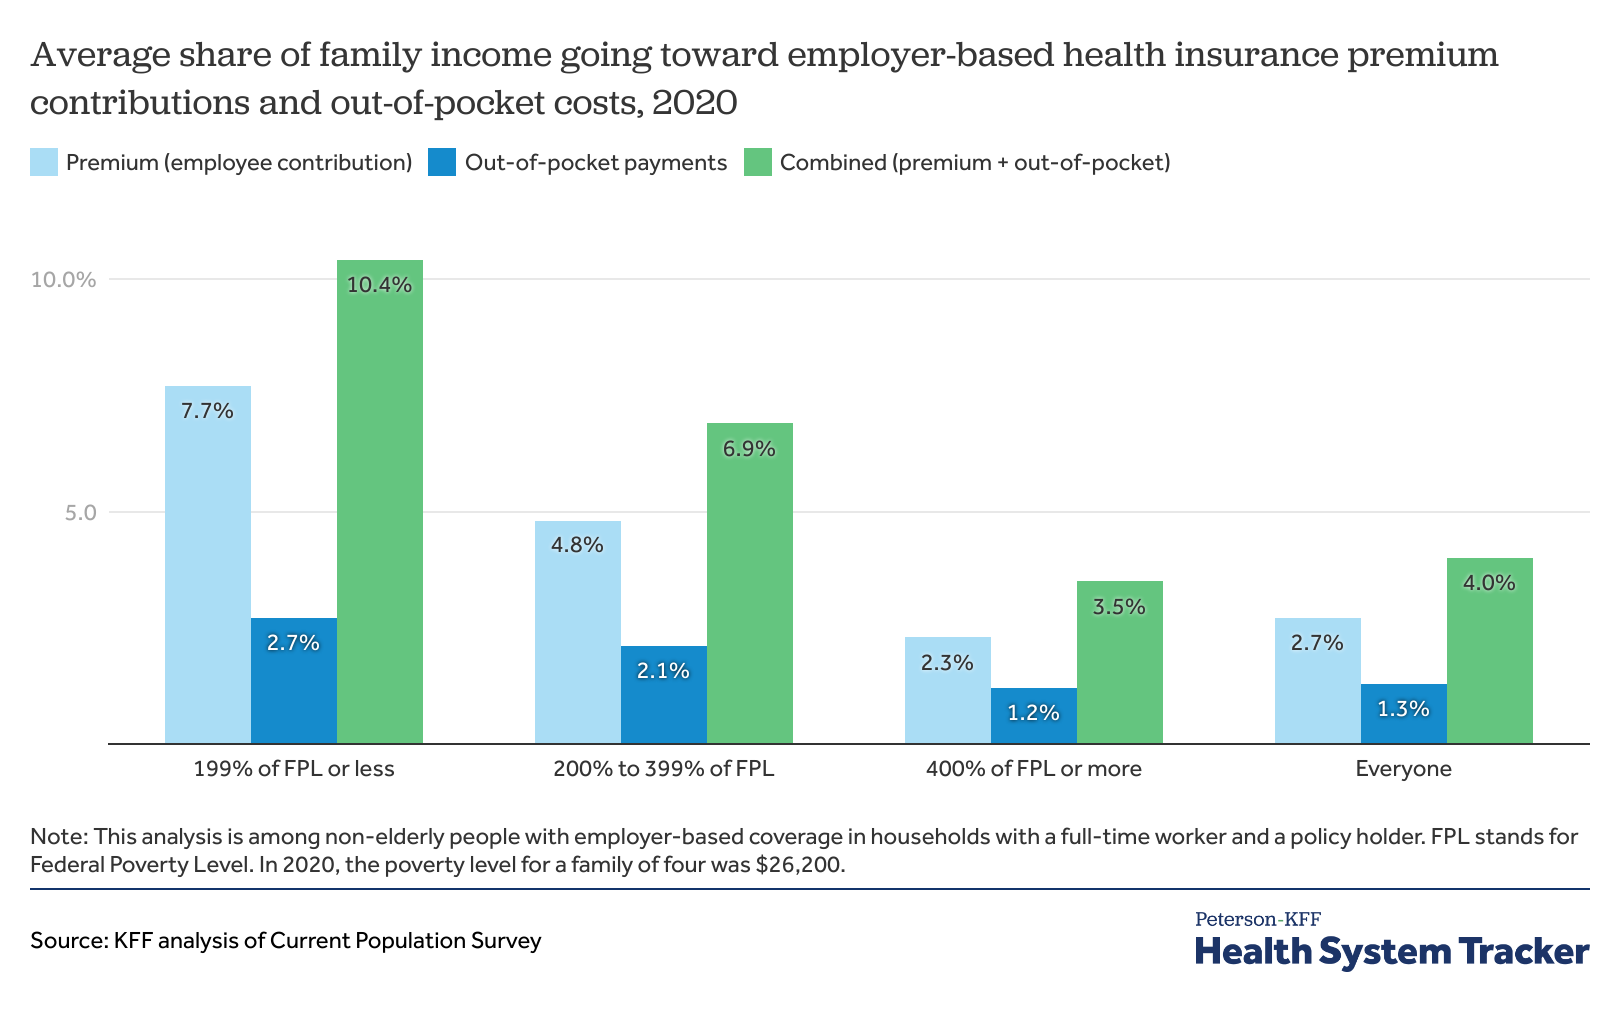 How do health care costs impact household finances and access to